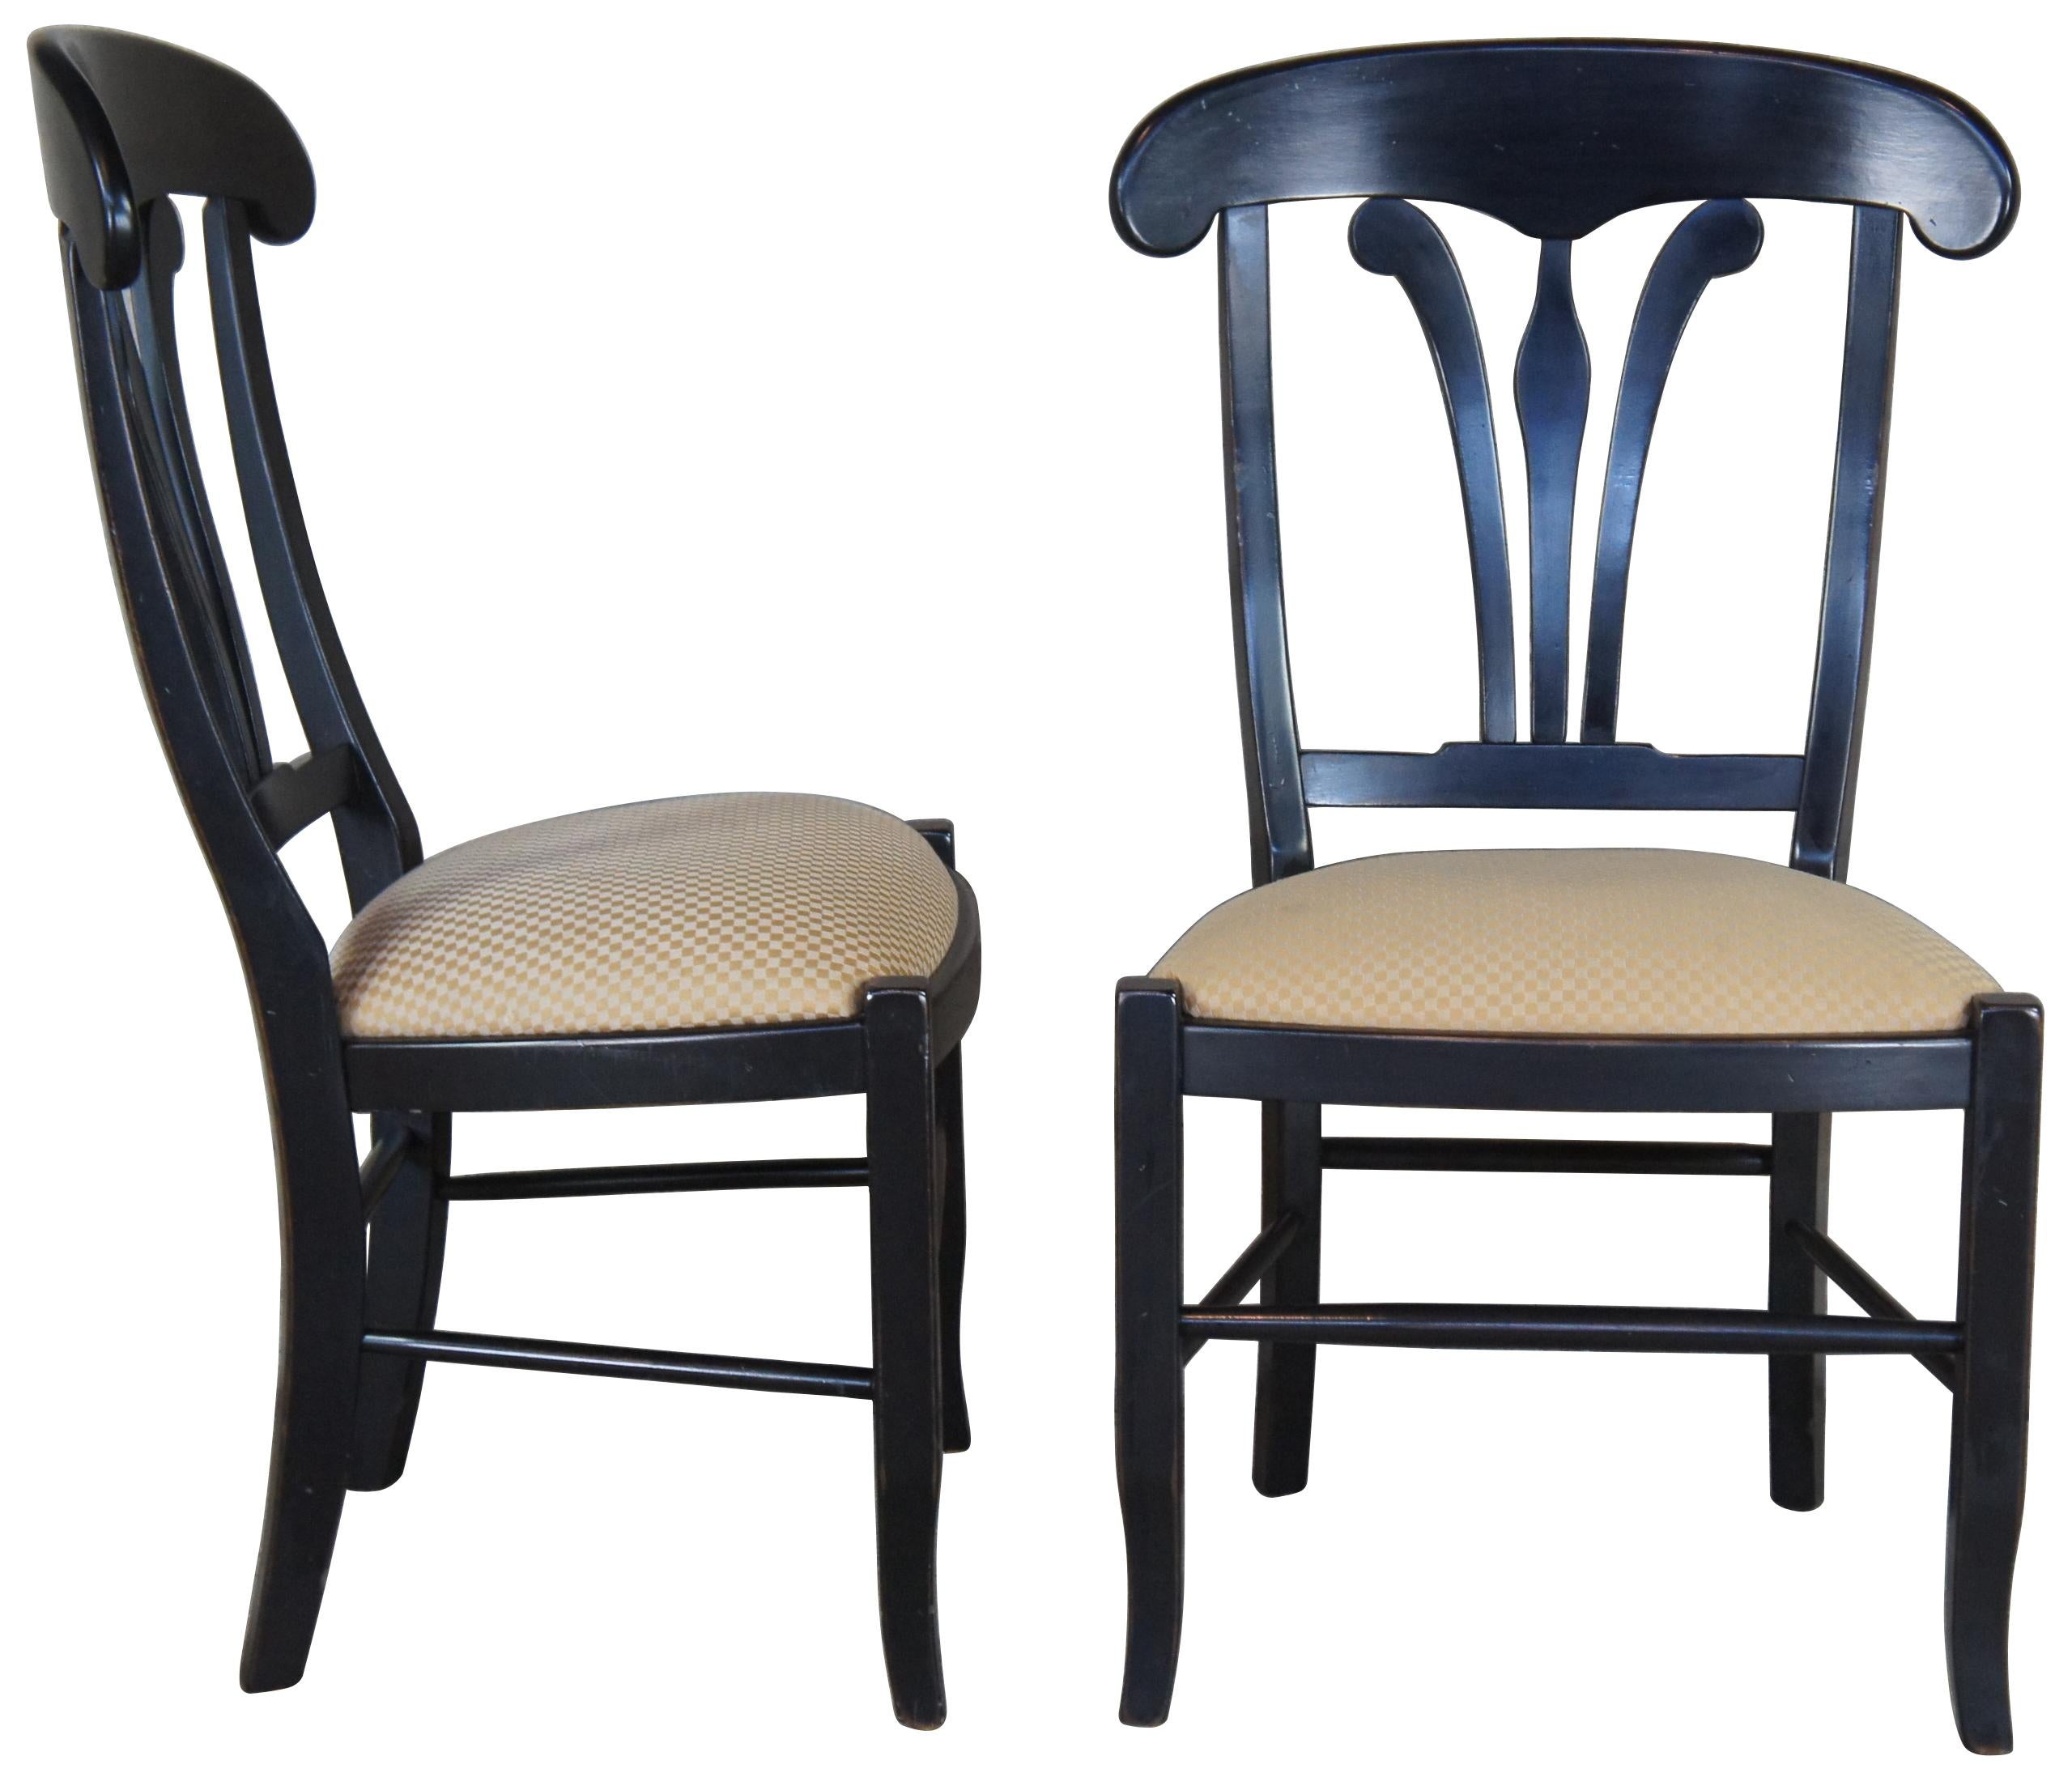 Six Nichols & Stone country manor farmhouse dining chairs. Features a black maple frame and gold checked fabric seat. 381UQ - 210 - 92.
     